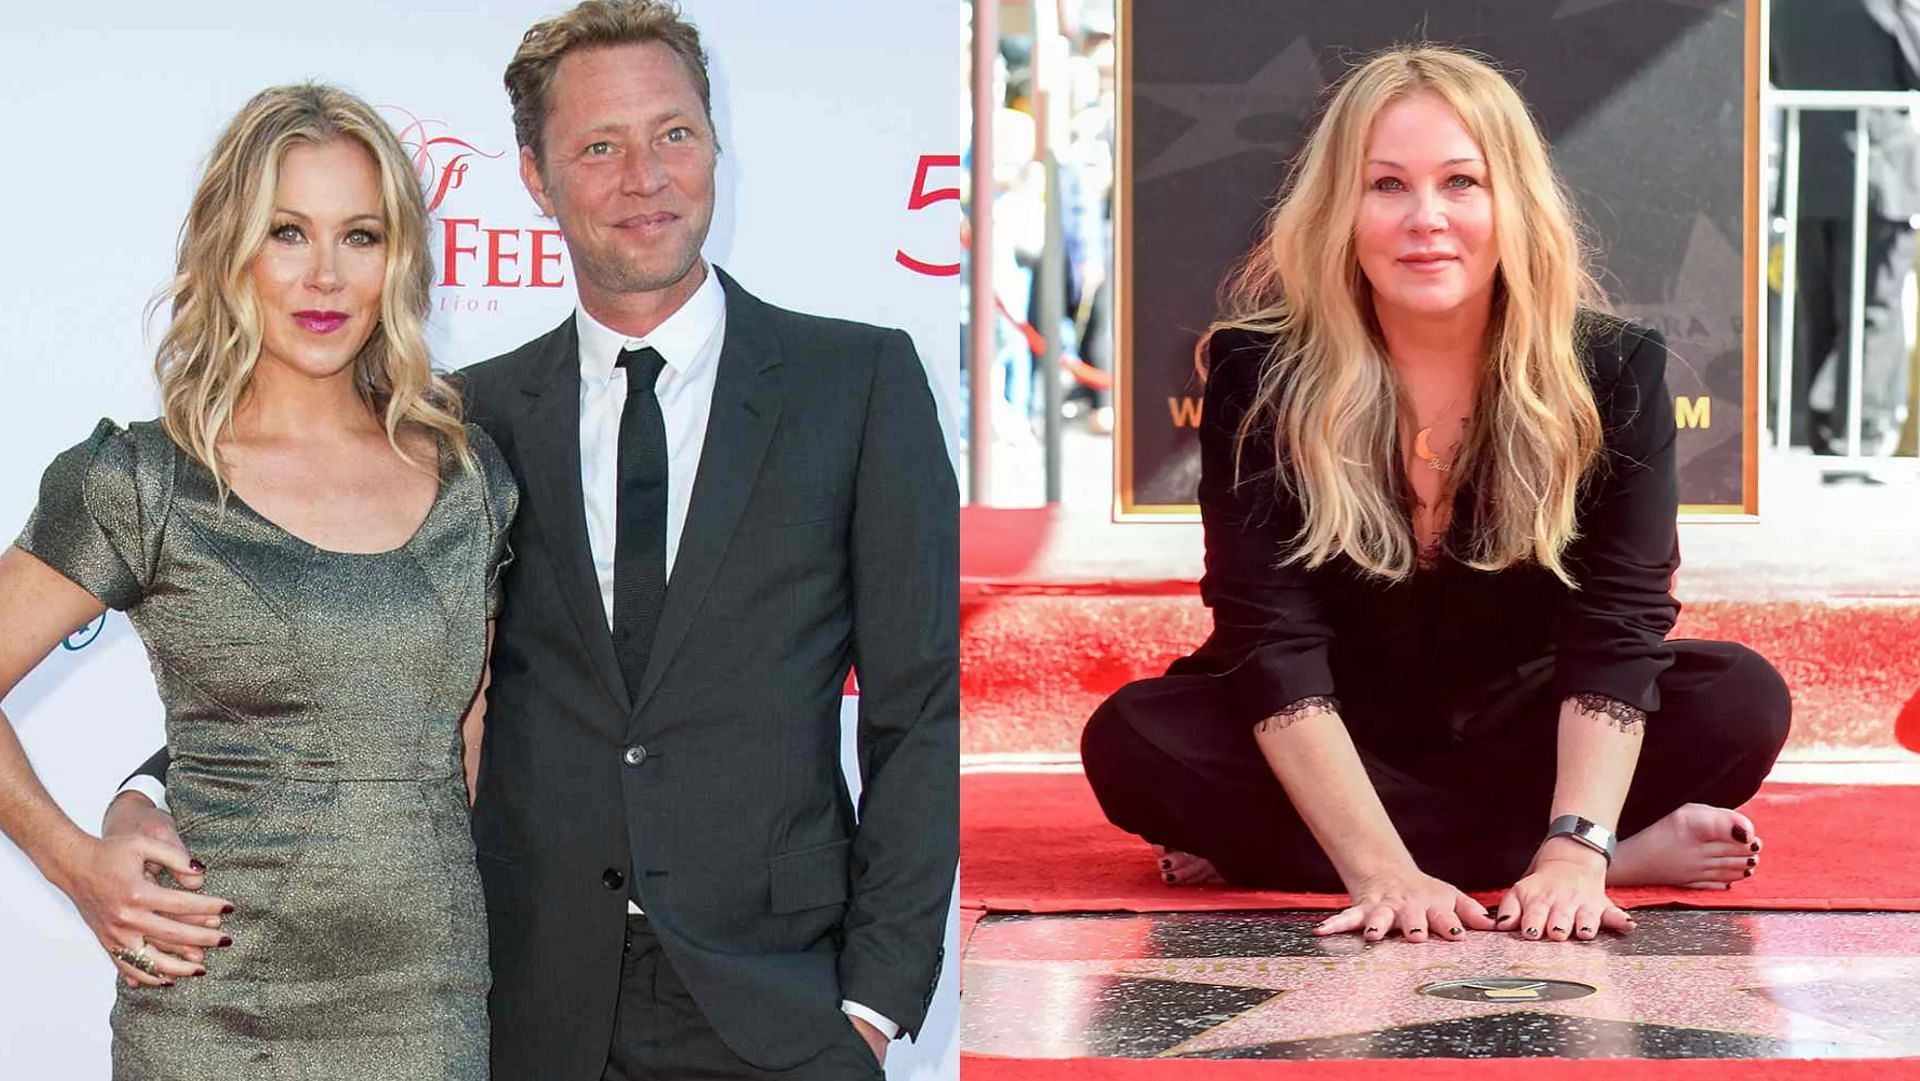 Christina Applegate tied the knot with Martyn LeNoble in 2013. (Images via Valerie Macon/Getty)